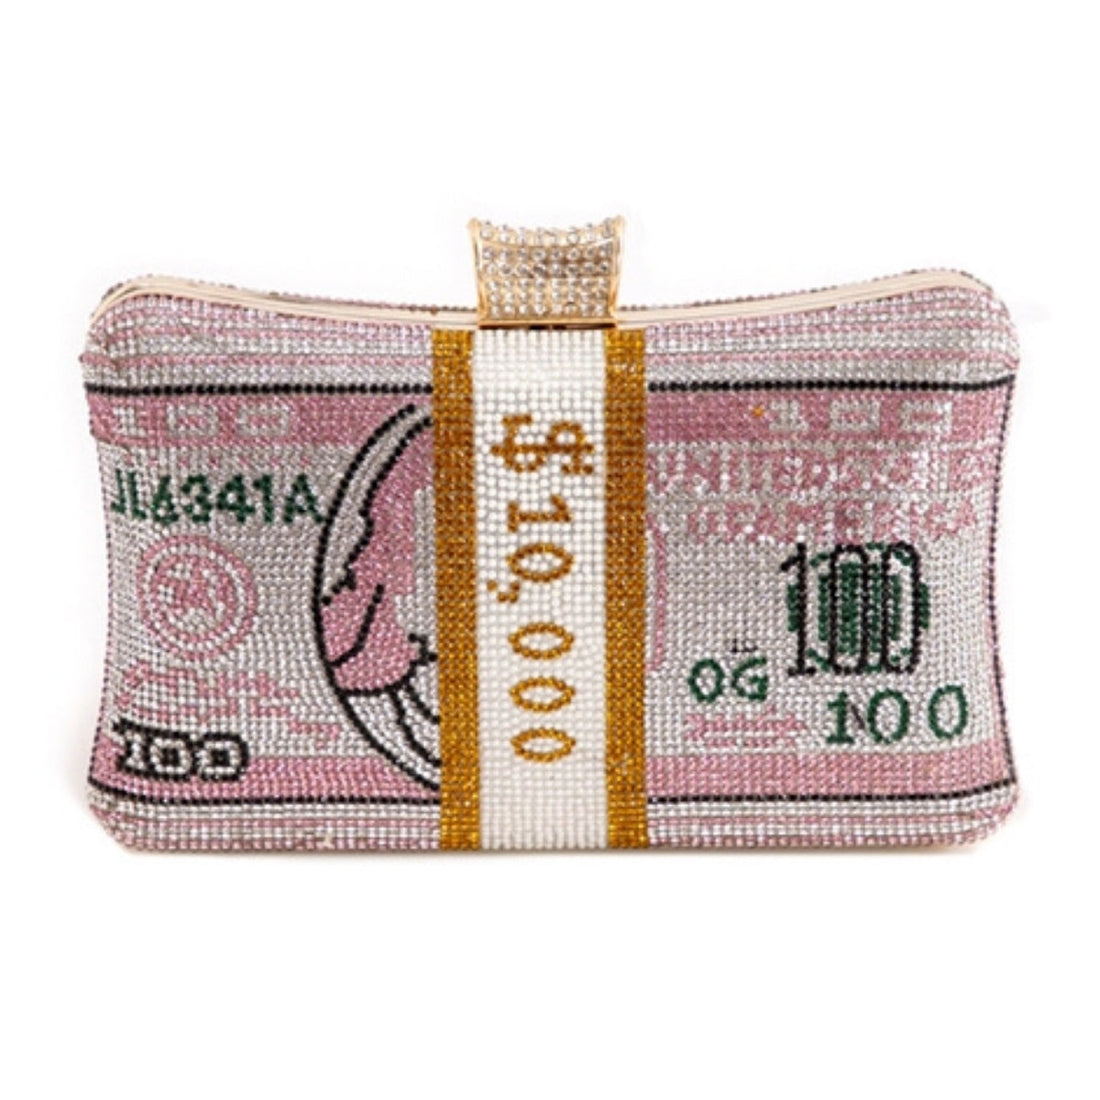 Pink Bling Banded Cash Luxury Clutch